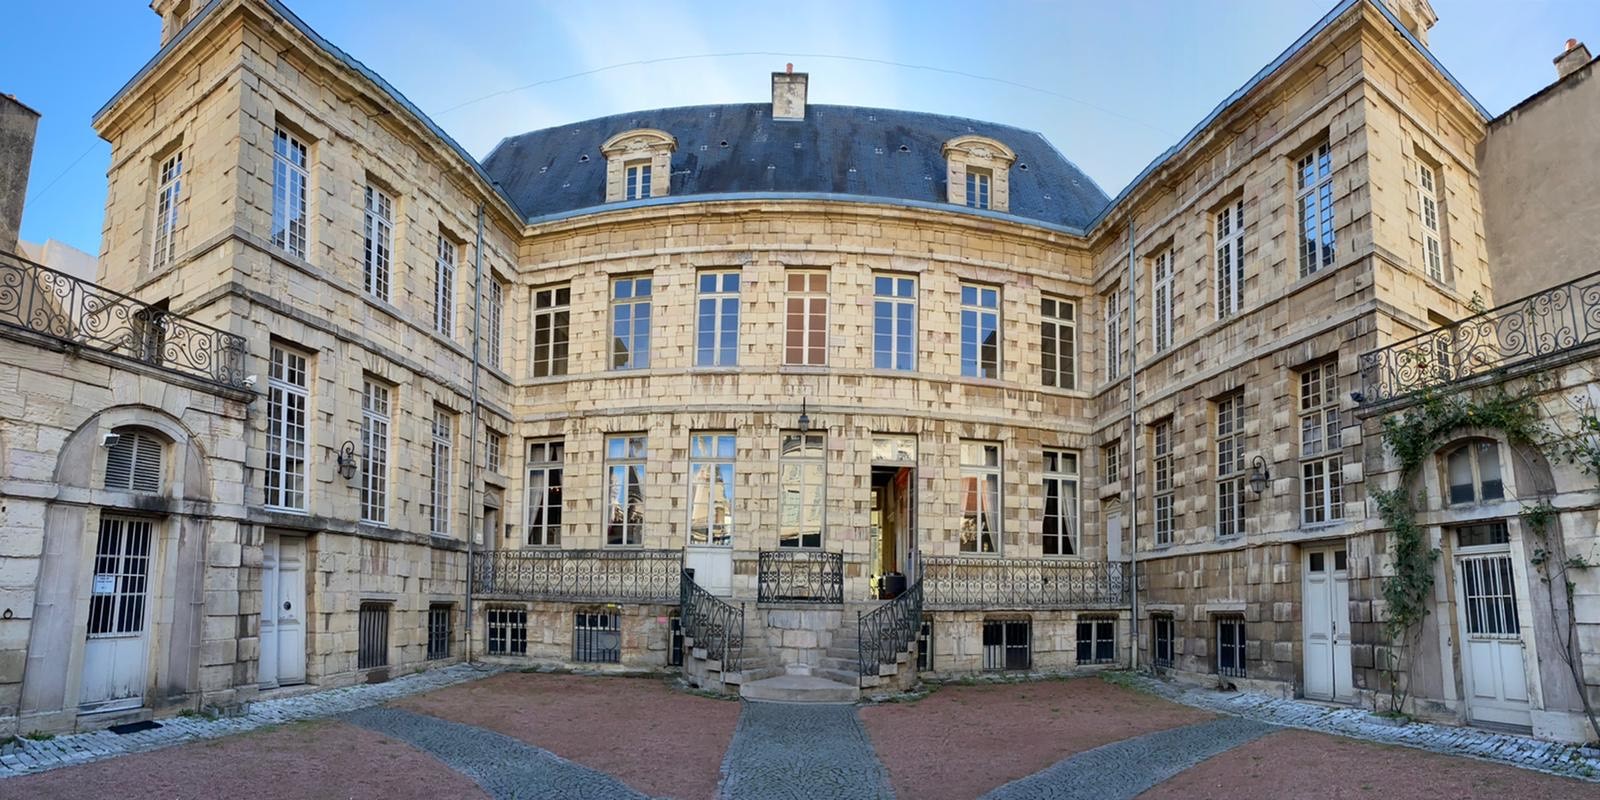 The OIV has announced it will transfer its headquarters to Dijon, France